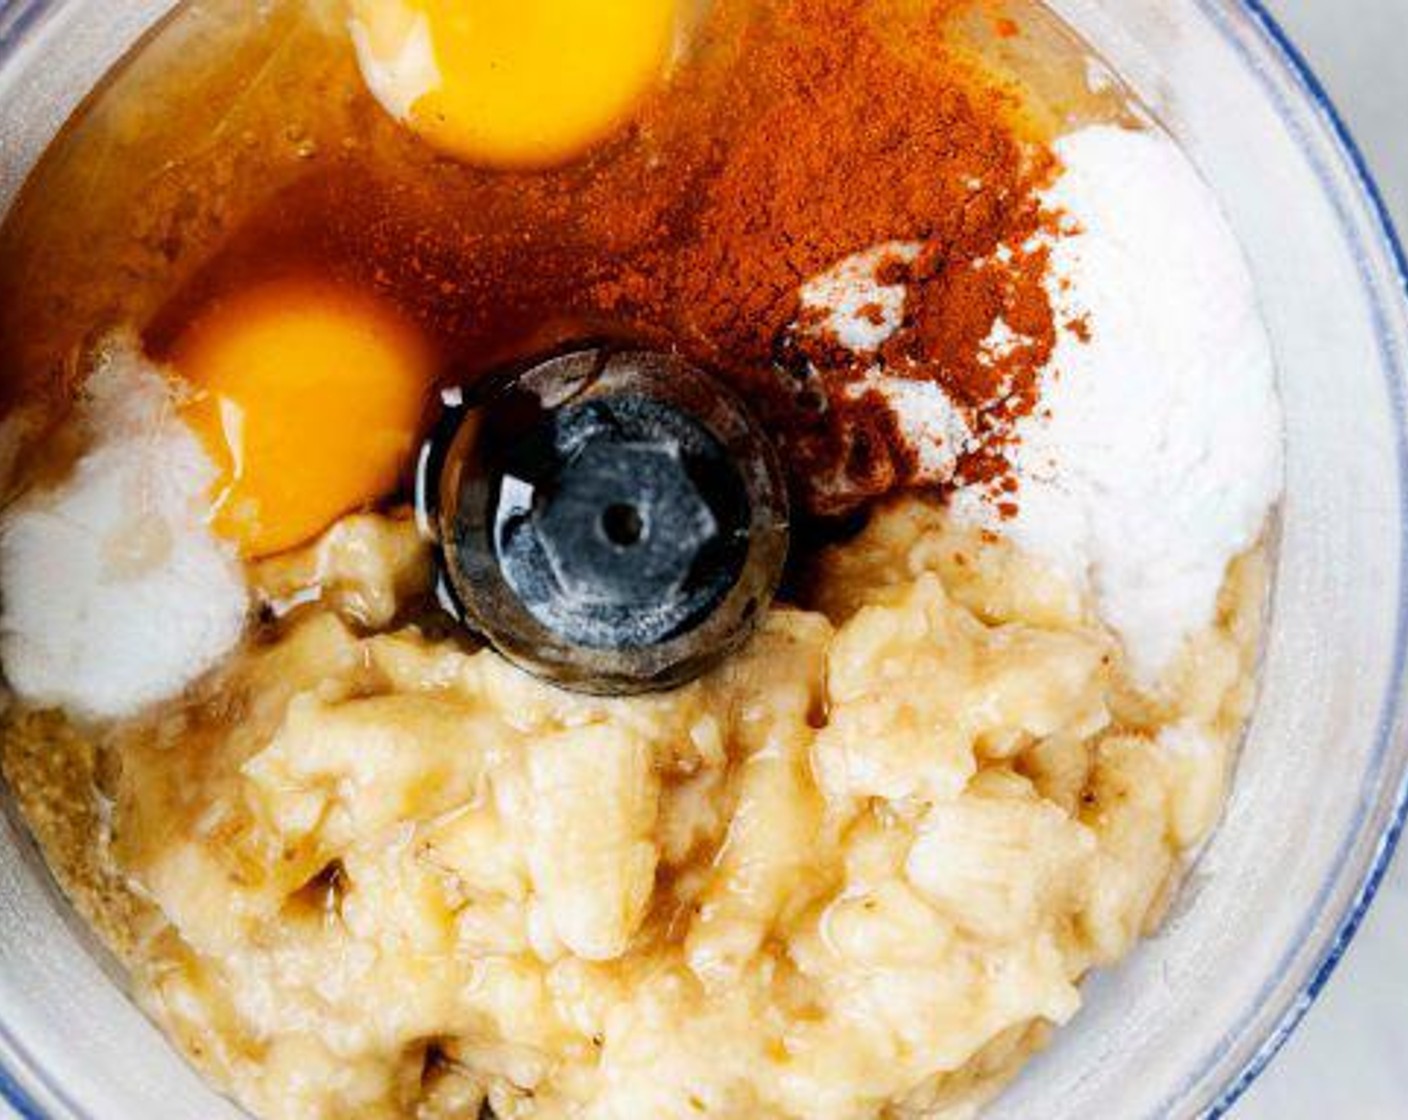 step 3 To the blender/food processor add Coconut Vinegar (1 Tbsp), Mashed Banana, Eggs (3), Baking Powder (1 tsp), Baking Soda (1/2 tsp), Maple Syrup (1/4 cup), Vanilla Extract (1 tsp) and Ground Cinnamon (1 tsp). Pulse until all ingredients are combined